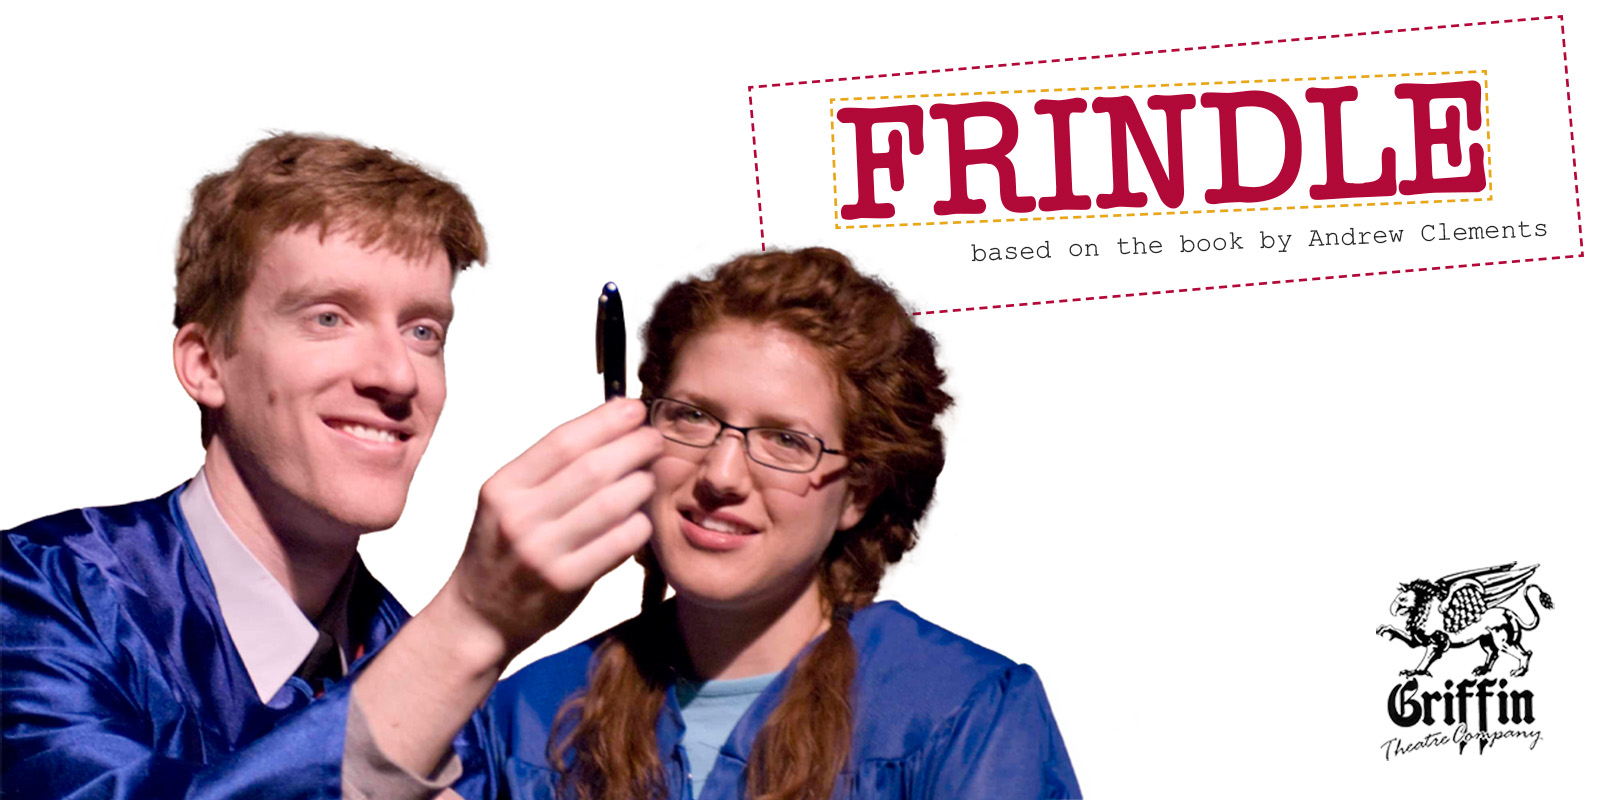 Frindle, based on the book by Andrew Clements, at the Emelin Theatre, Mamaroneck, NY. October 19, 2024.